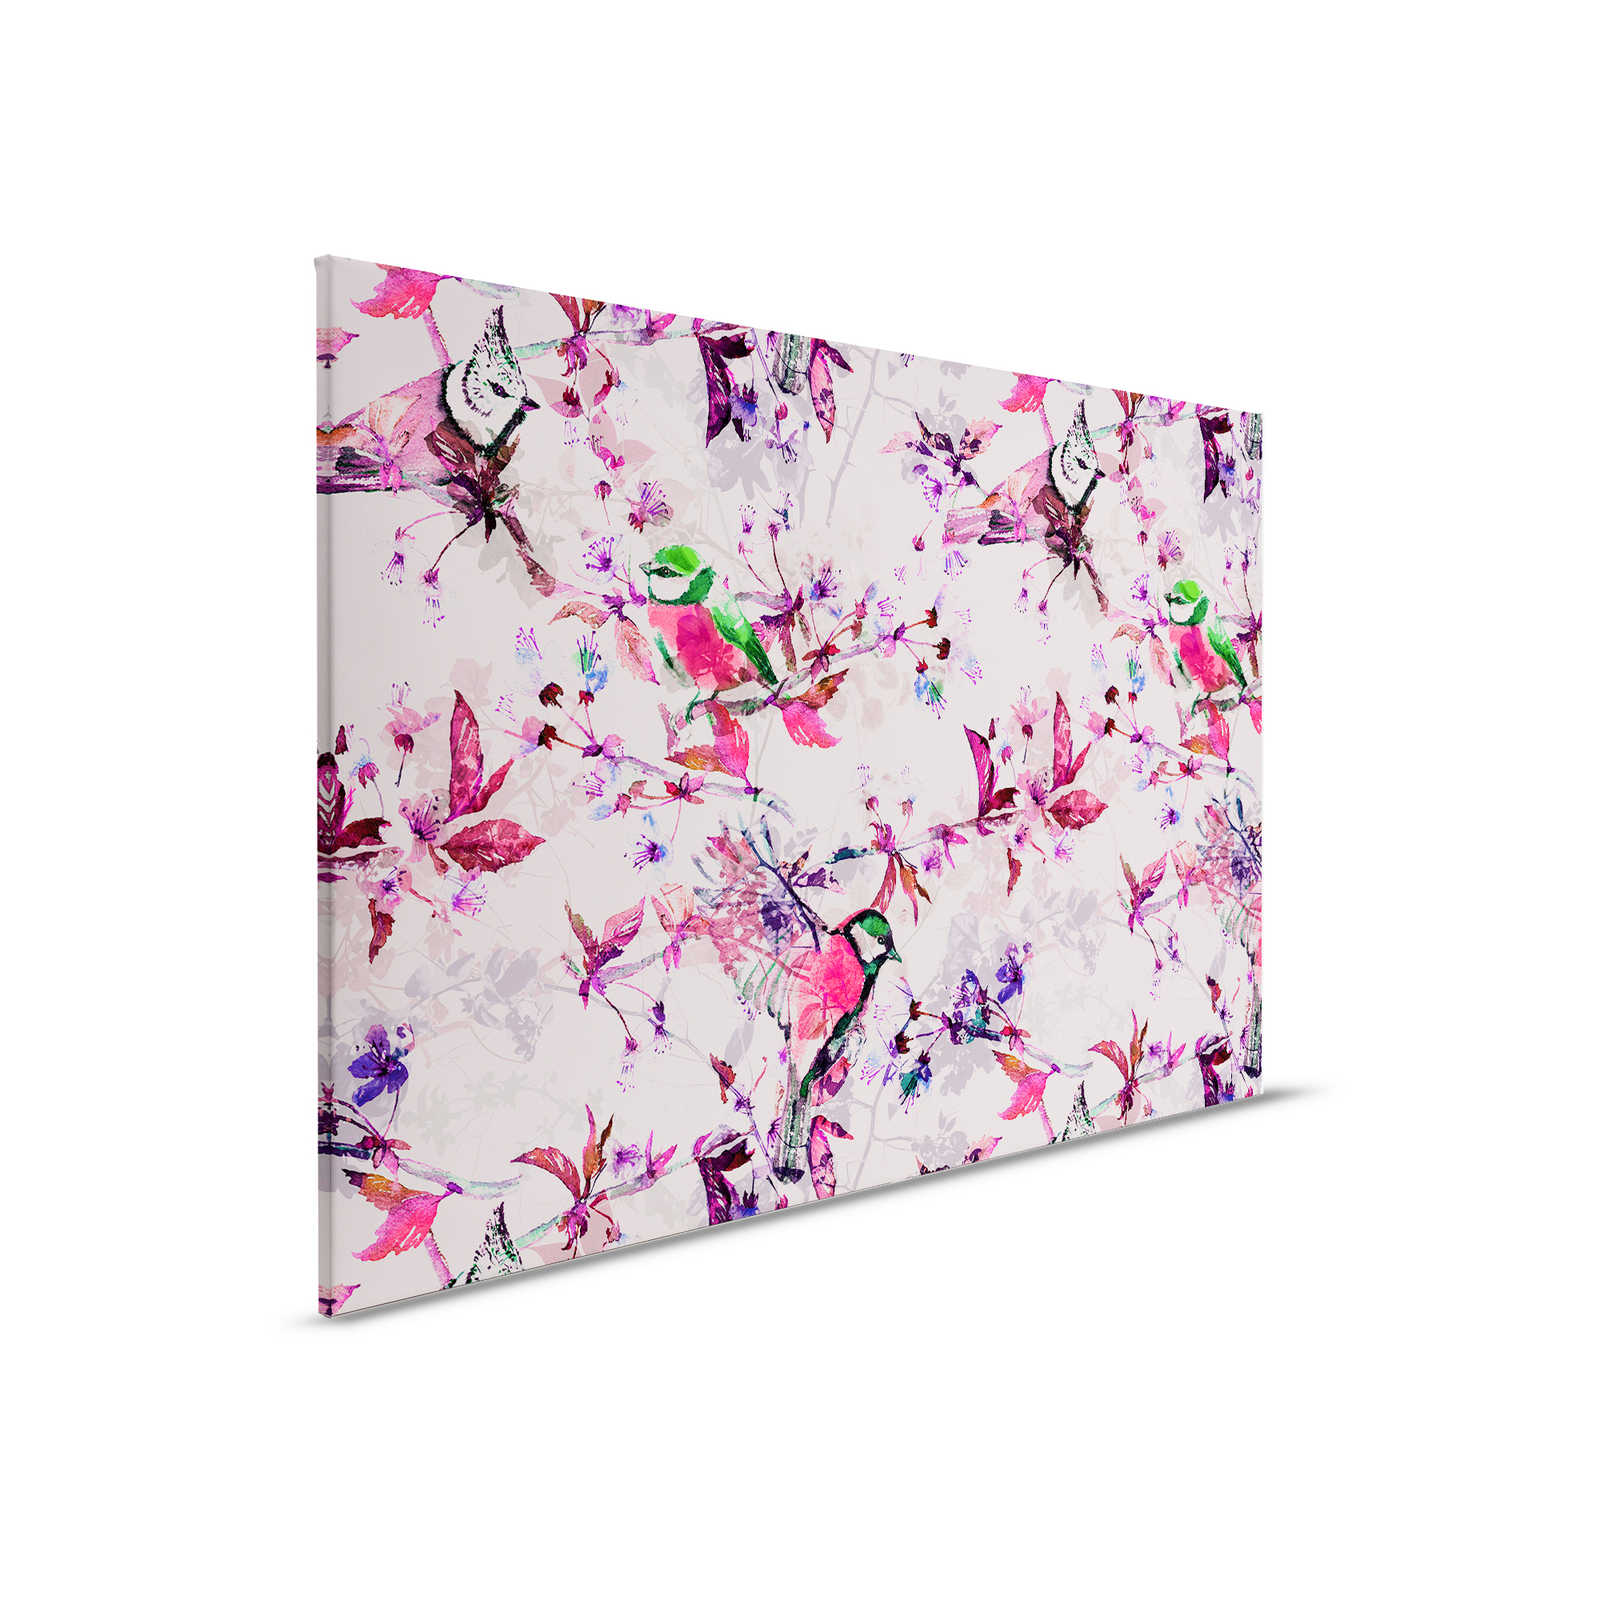         Birds Collage Style Canvas Painting | pink, blue - 0.90 m x 0.60 m
    